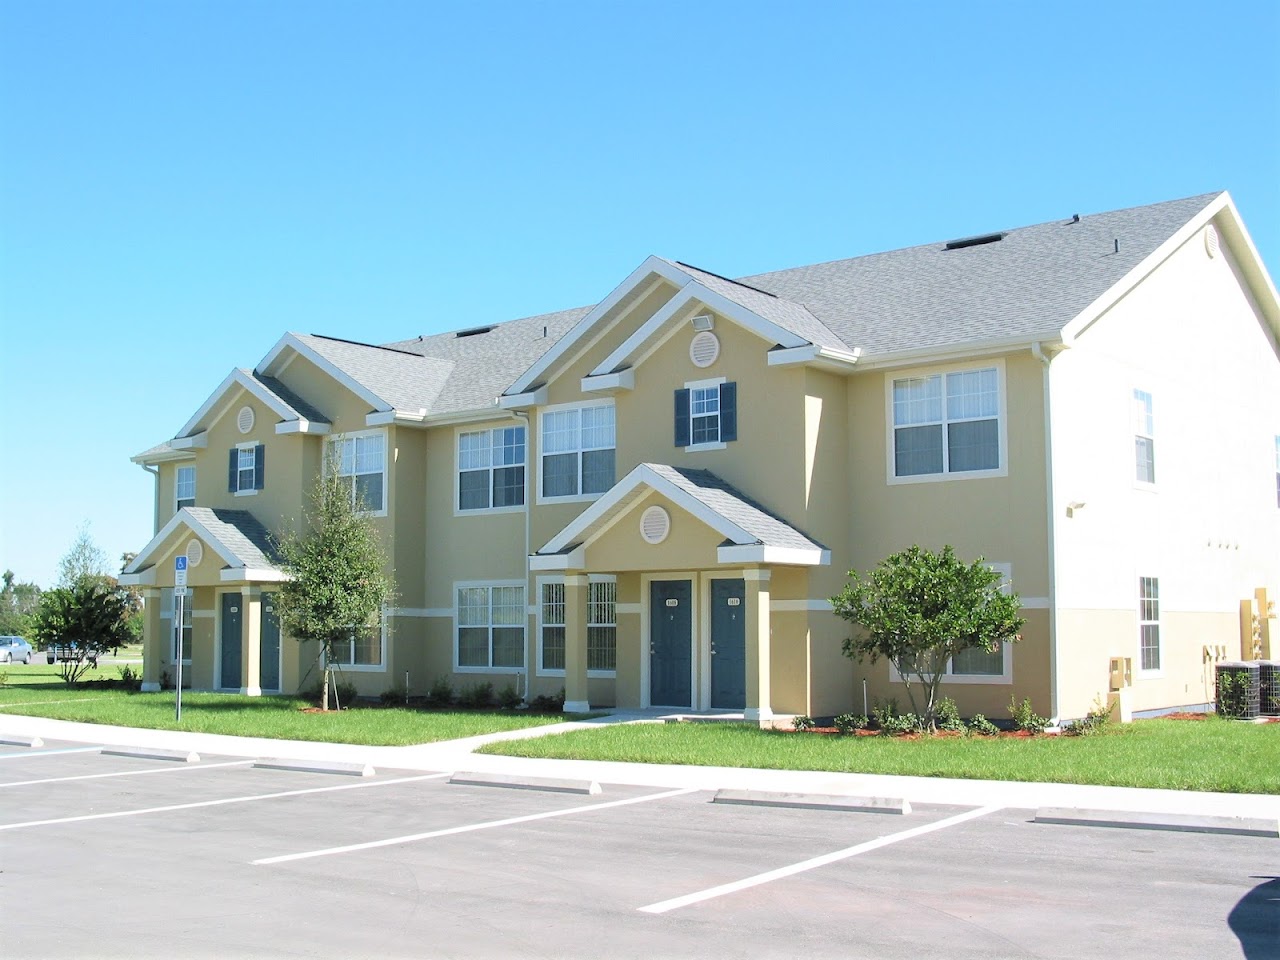 Photo of IRONGATE. Affordable housing located at 1791 BLAIR CASTLE CIR RUSKIN, FL 33570